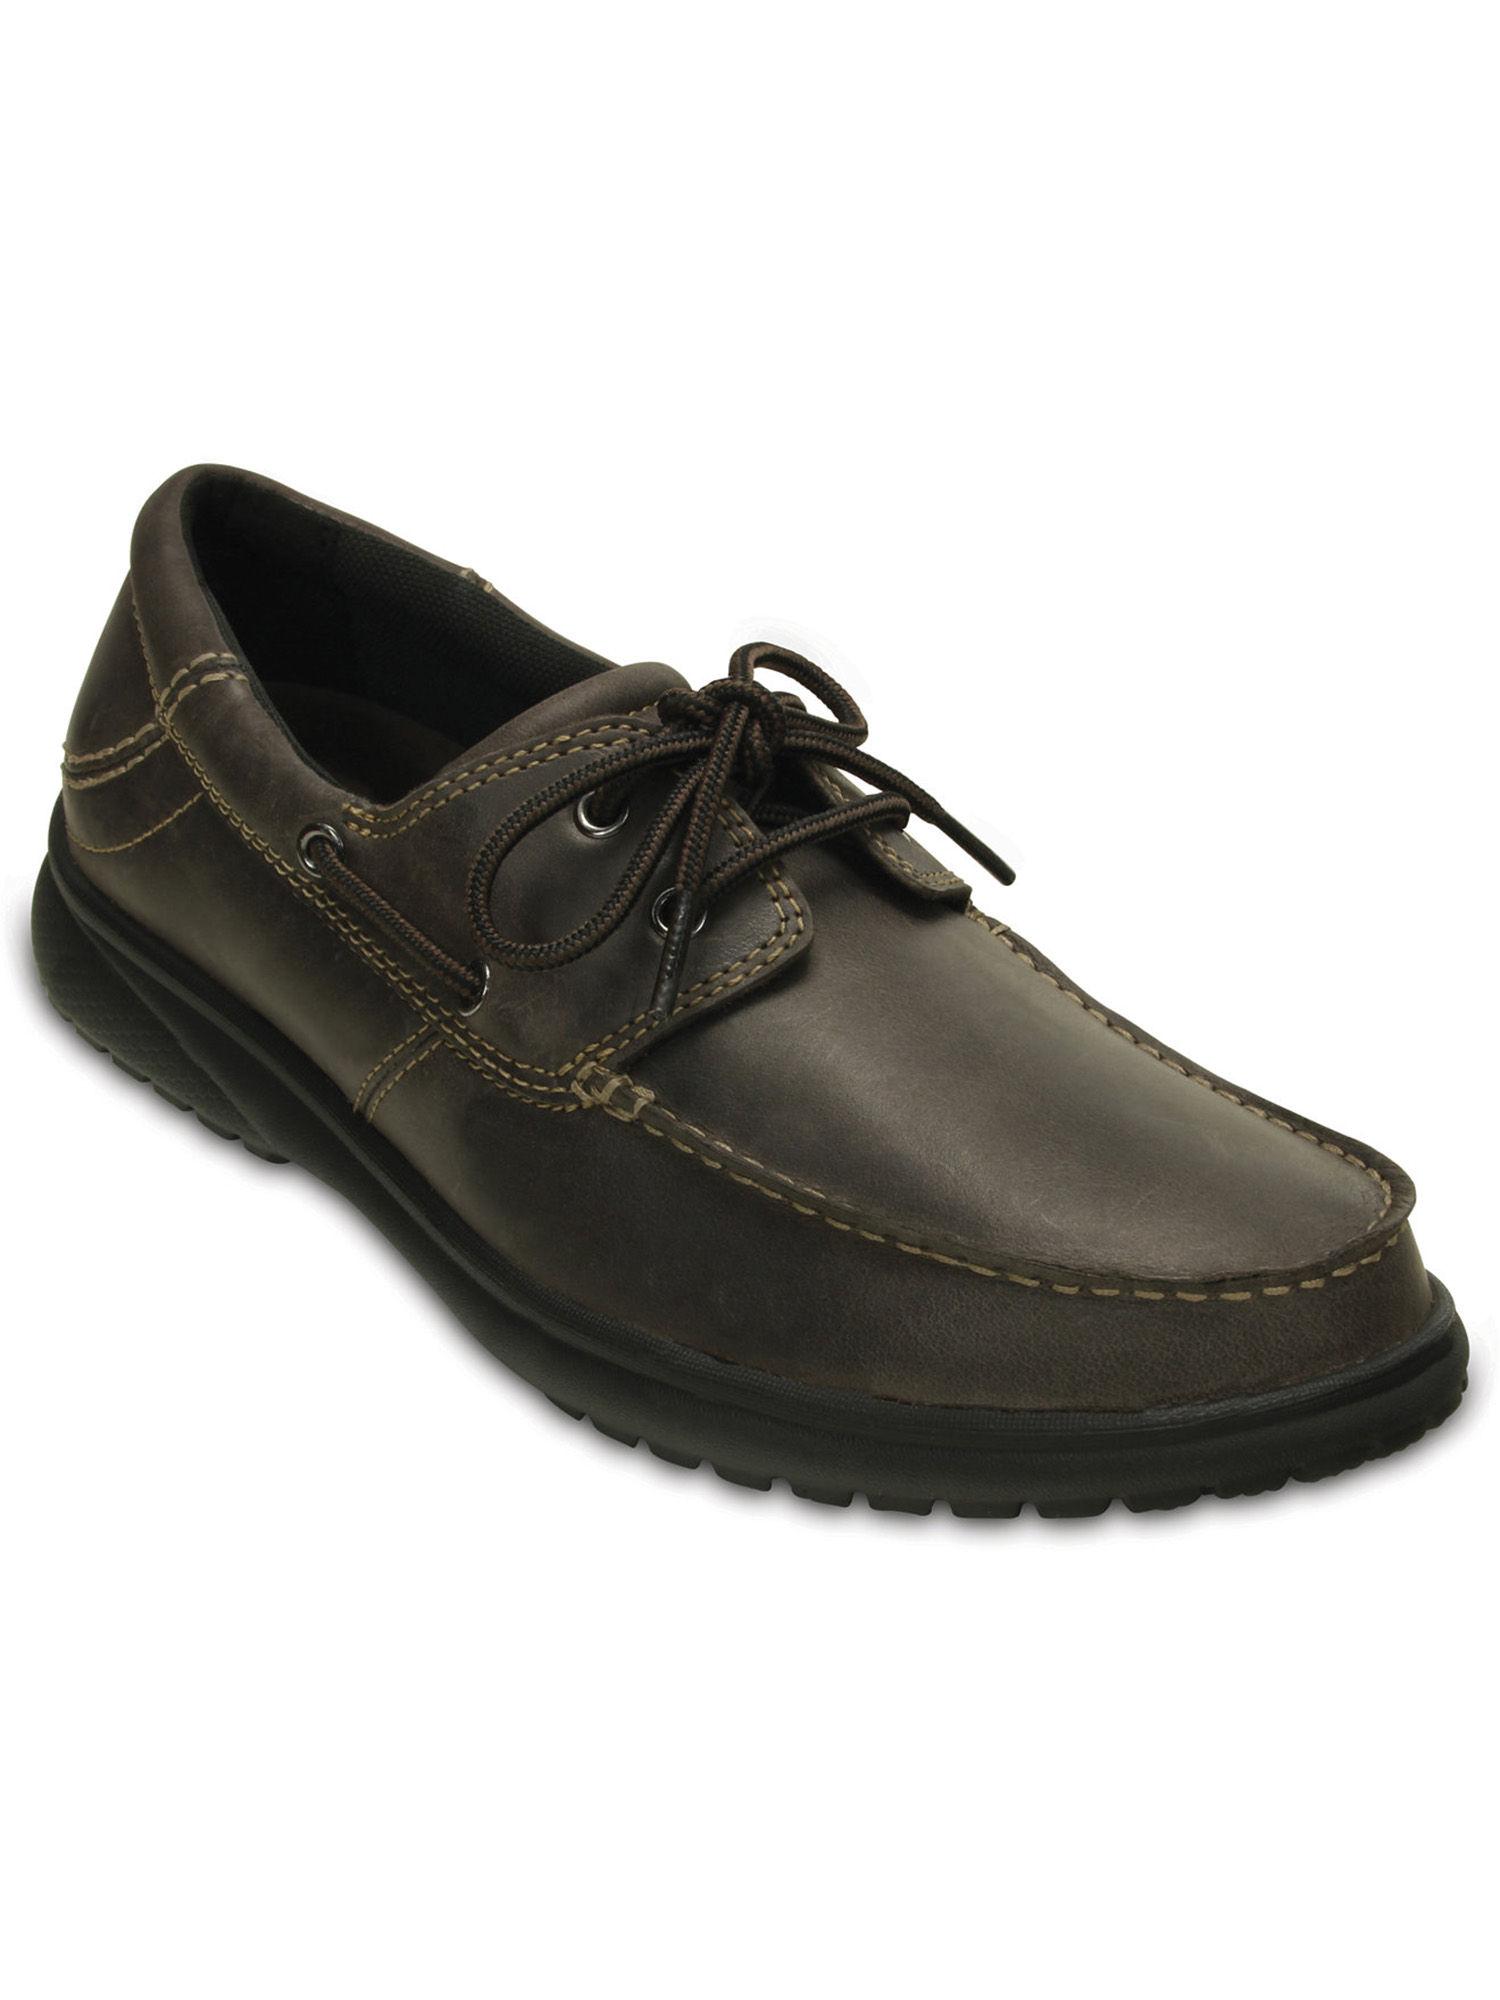 shaw-solid-brown-shoes